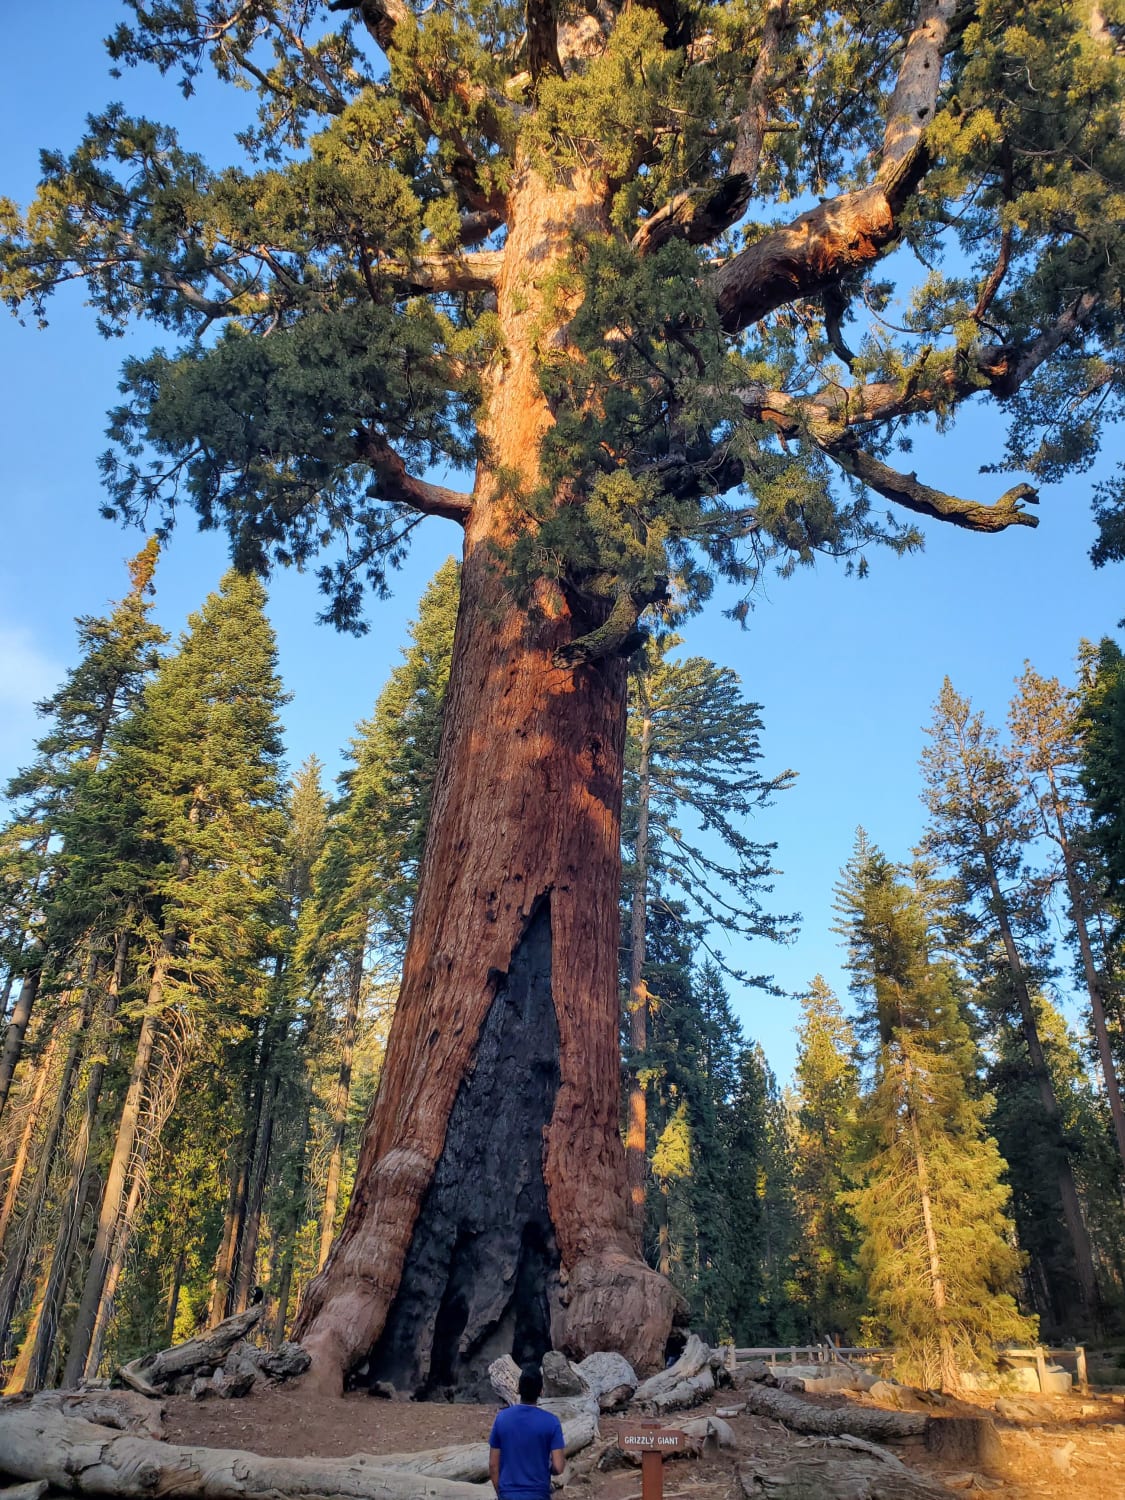 The grizzly giant sequoia tree that is more than 2000 years old still standing strong in Yosemite